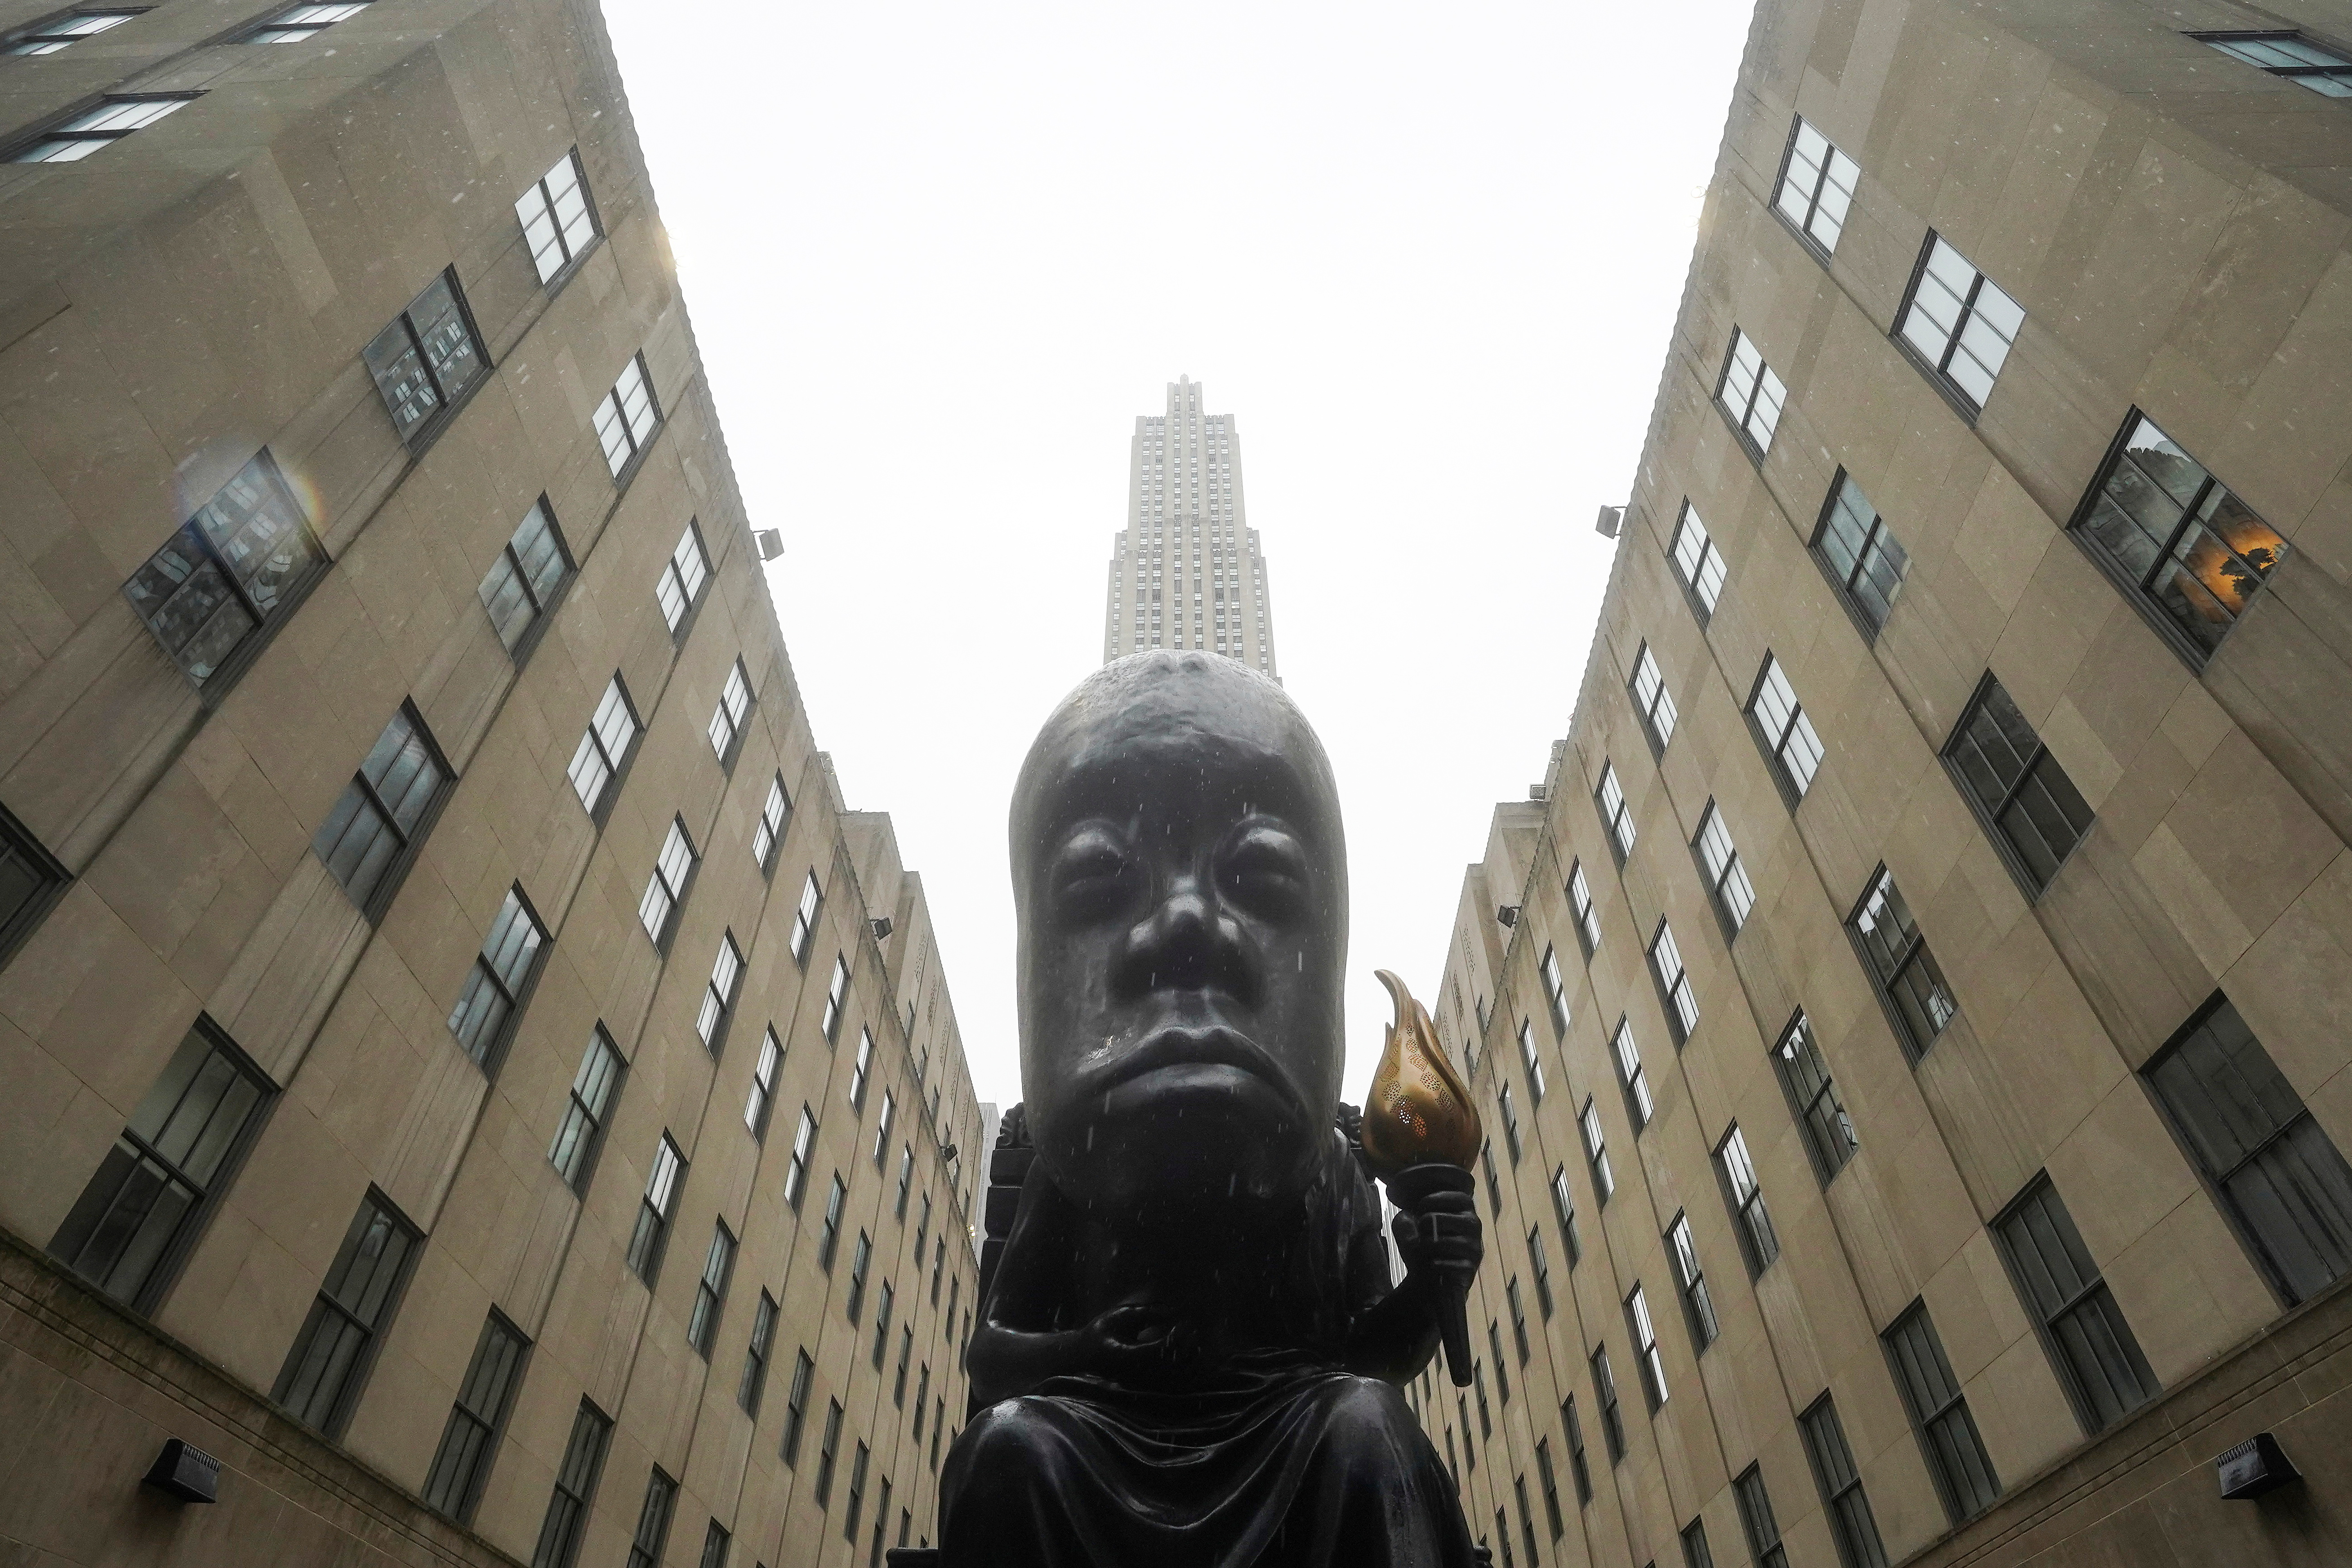 Sanford Biggers statue 'Oracle' is pictured in New York City